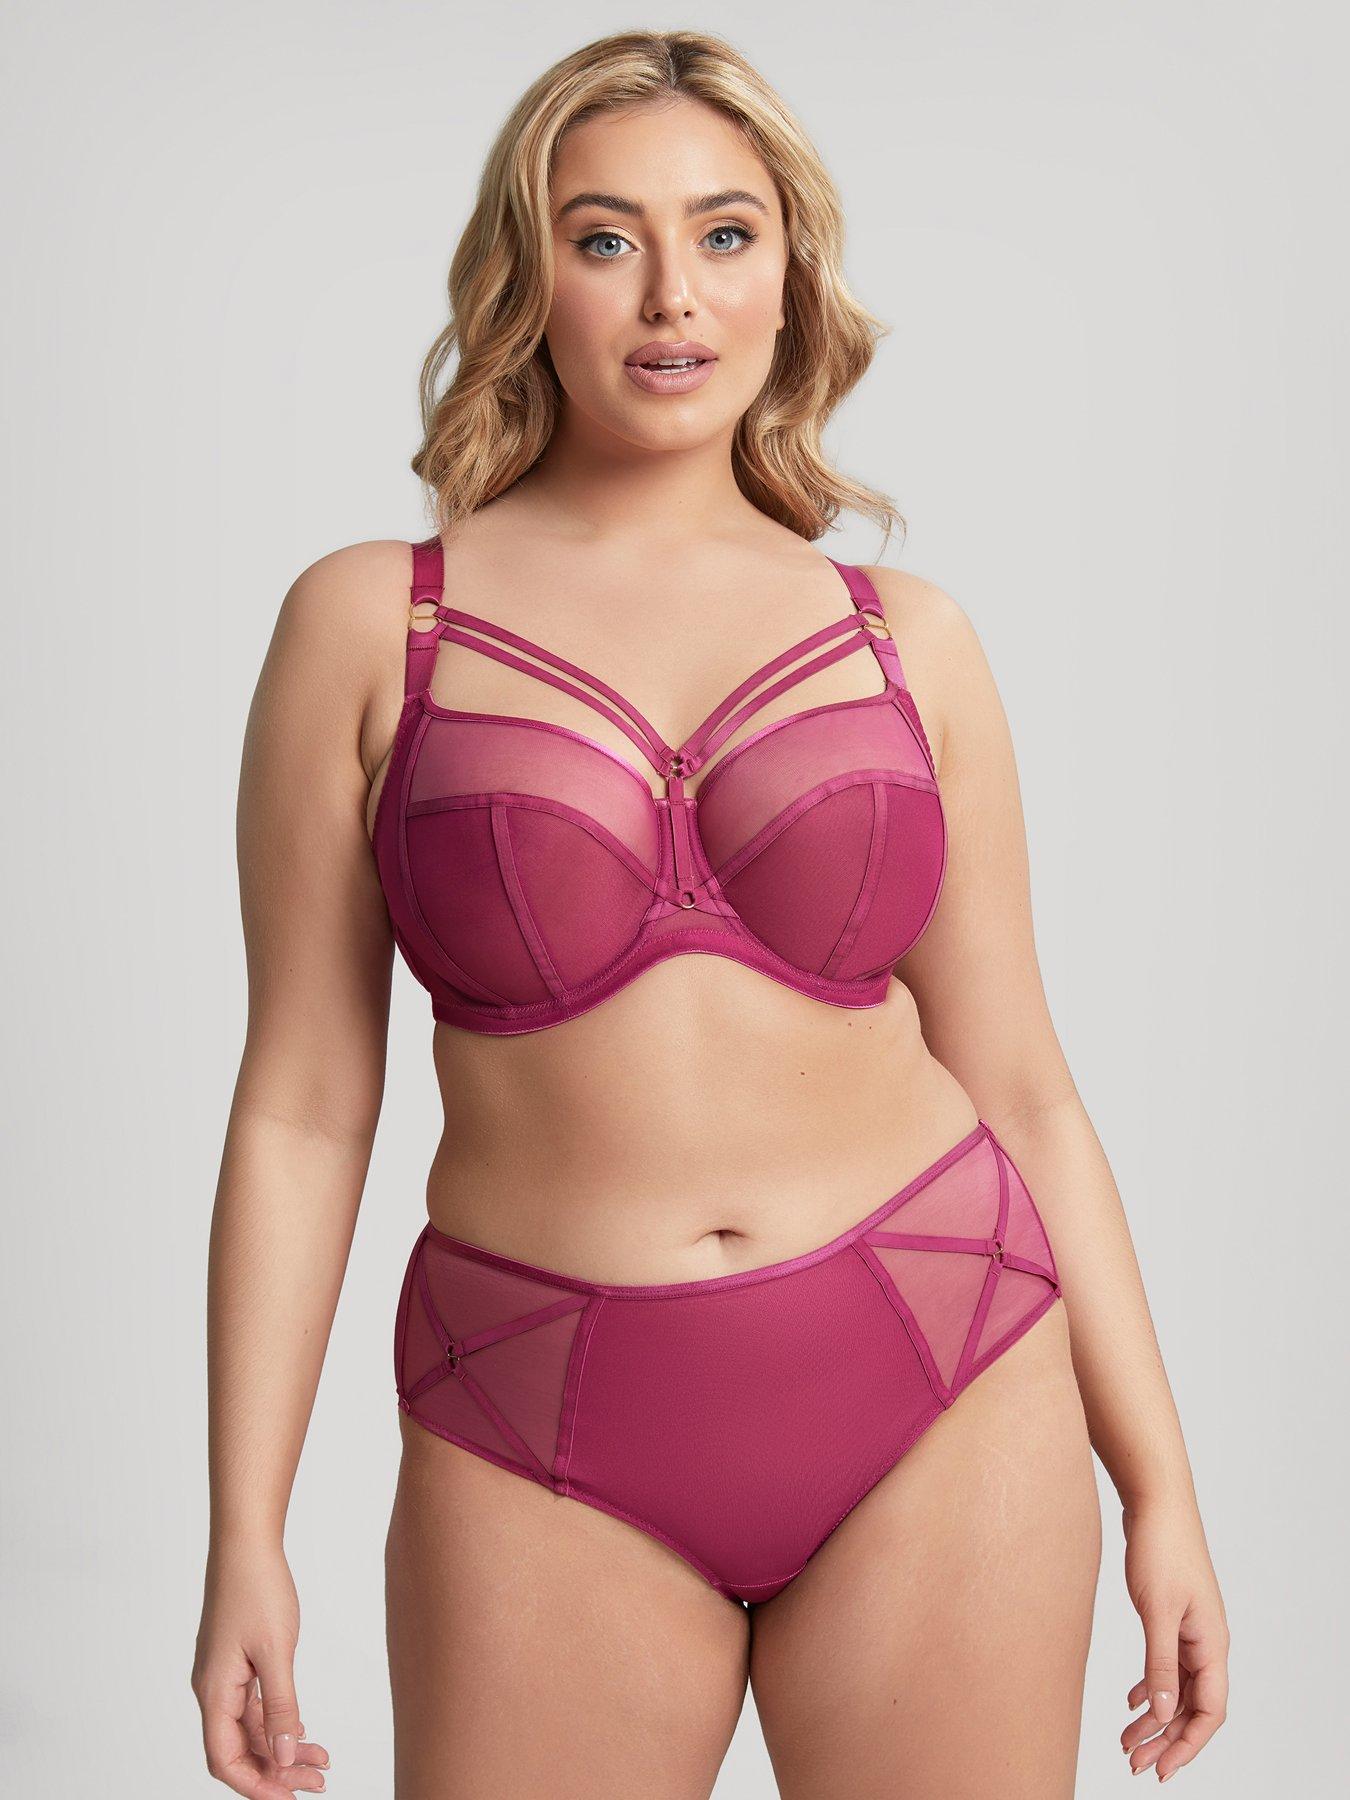 Sculptresse Dionne Full Cup Bra in Orchid - Busted Bra Shop